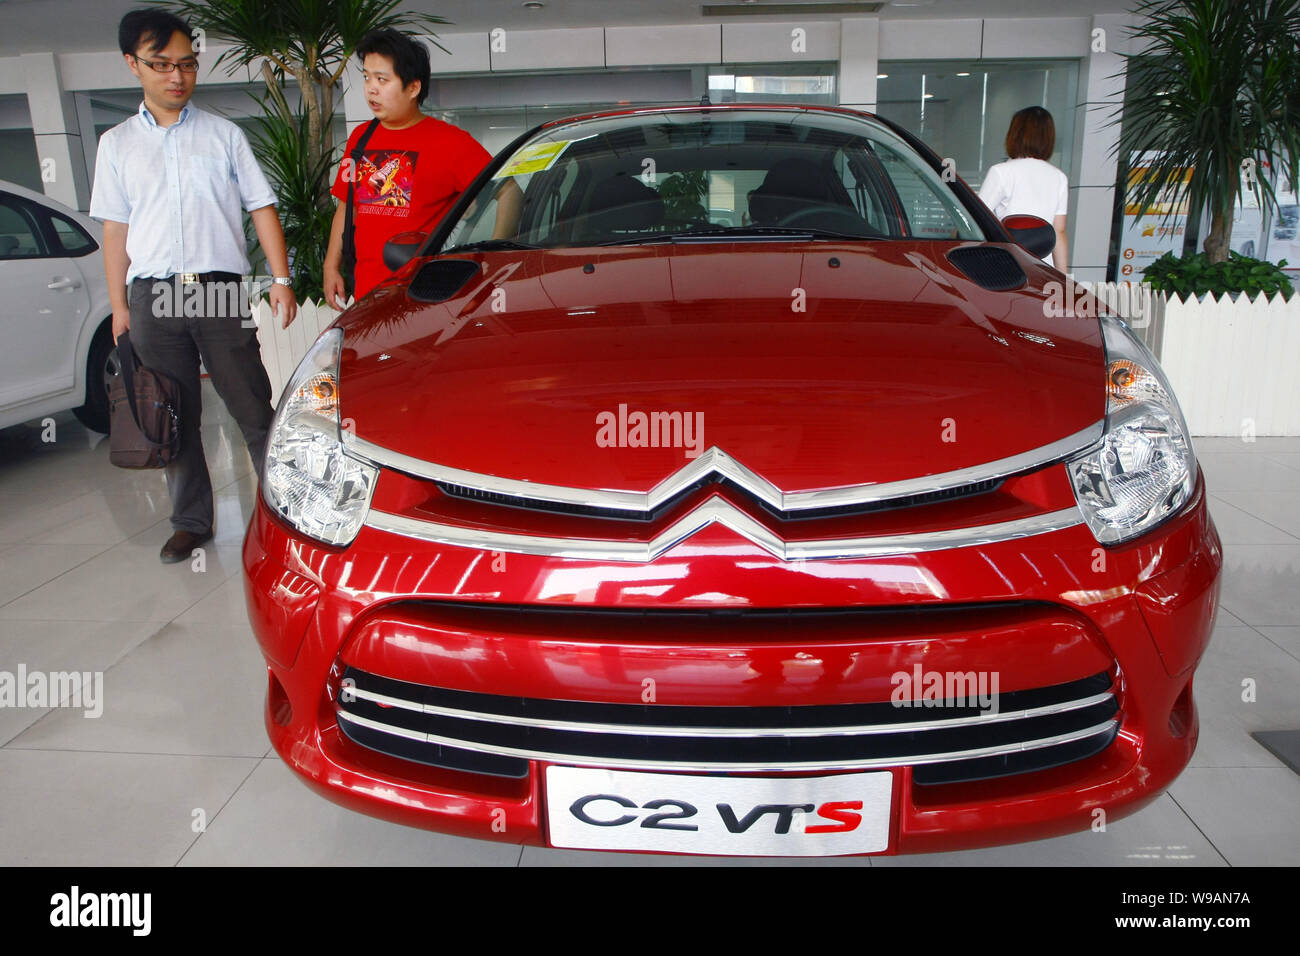 Chinese car buyers look at a Dongfeng Citroen C2 VTS at a Dongfeng Citroen dealership in Shanghai, China, September 8, 2010.   Volkswagen AG and PSA P Stock Photo